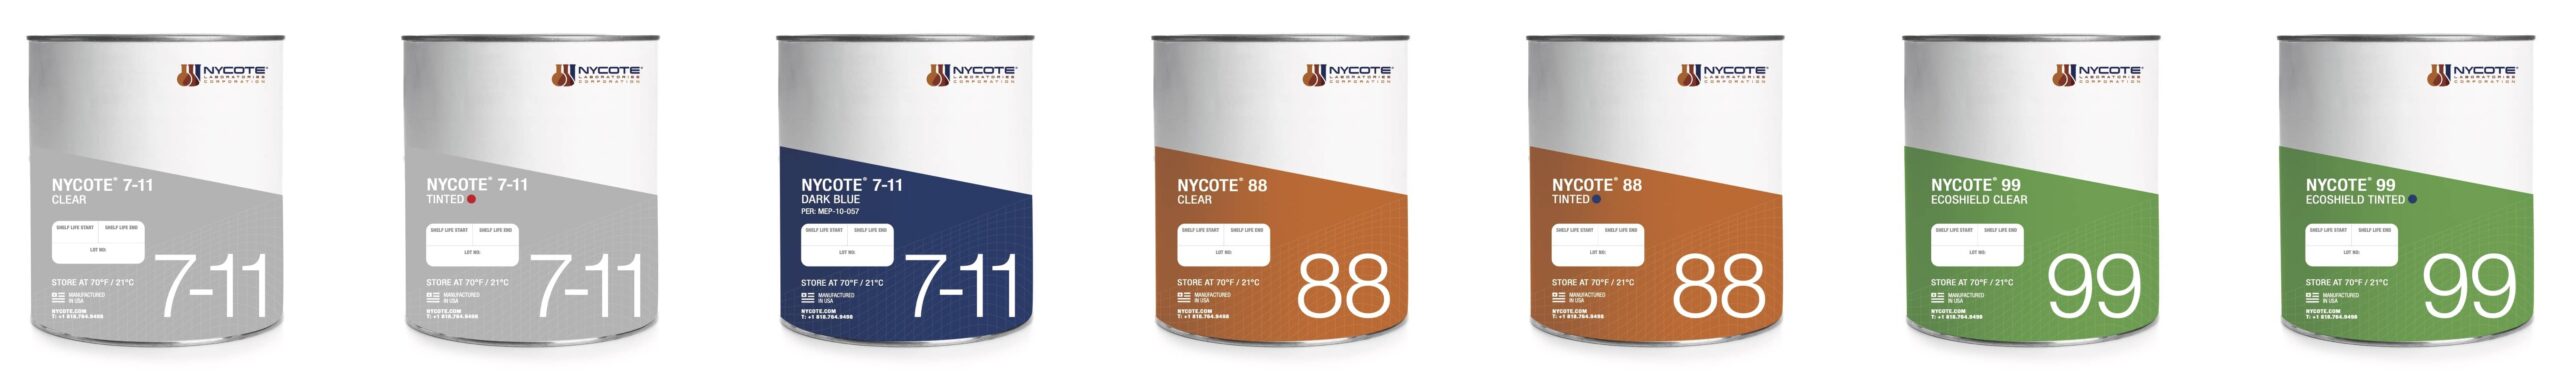 Antimicrobial Corrosion Protection Coating for Aerospace, Marine, and Defense Applications - Nycote Laboratories Corporation